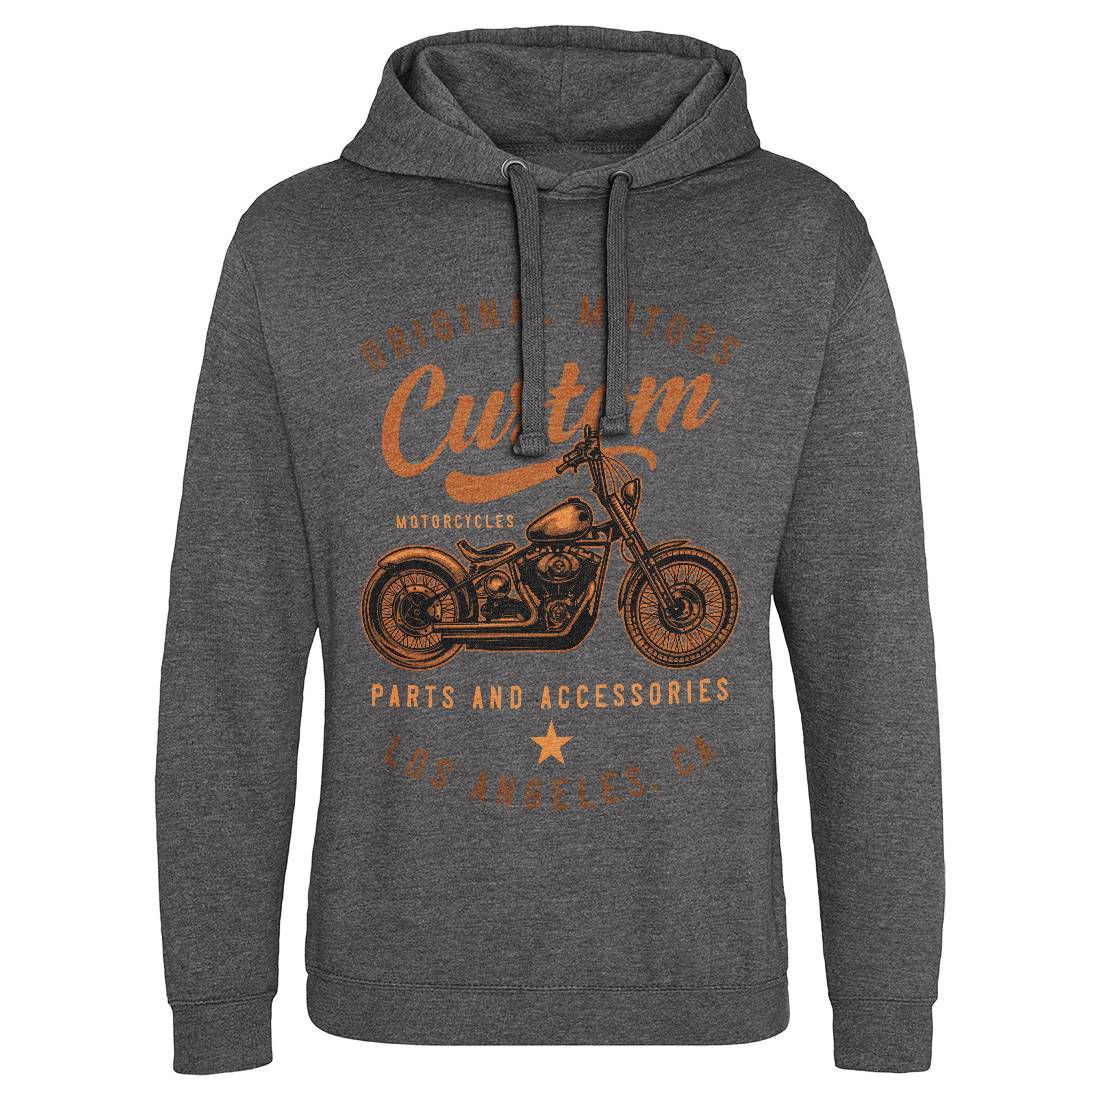 Los Angeles Mens Hoodie Without Pocket Motorcycles B147